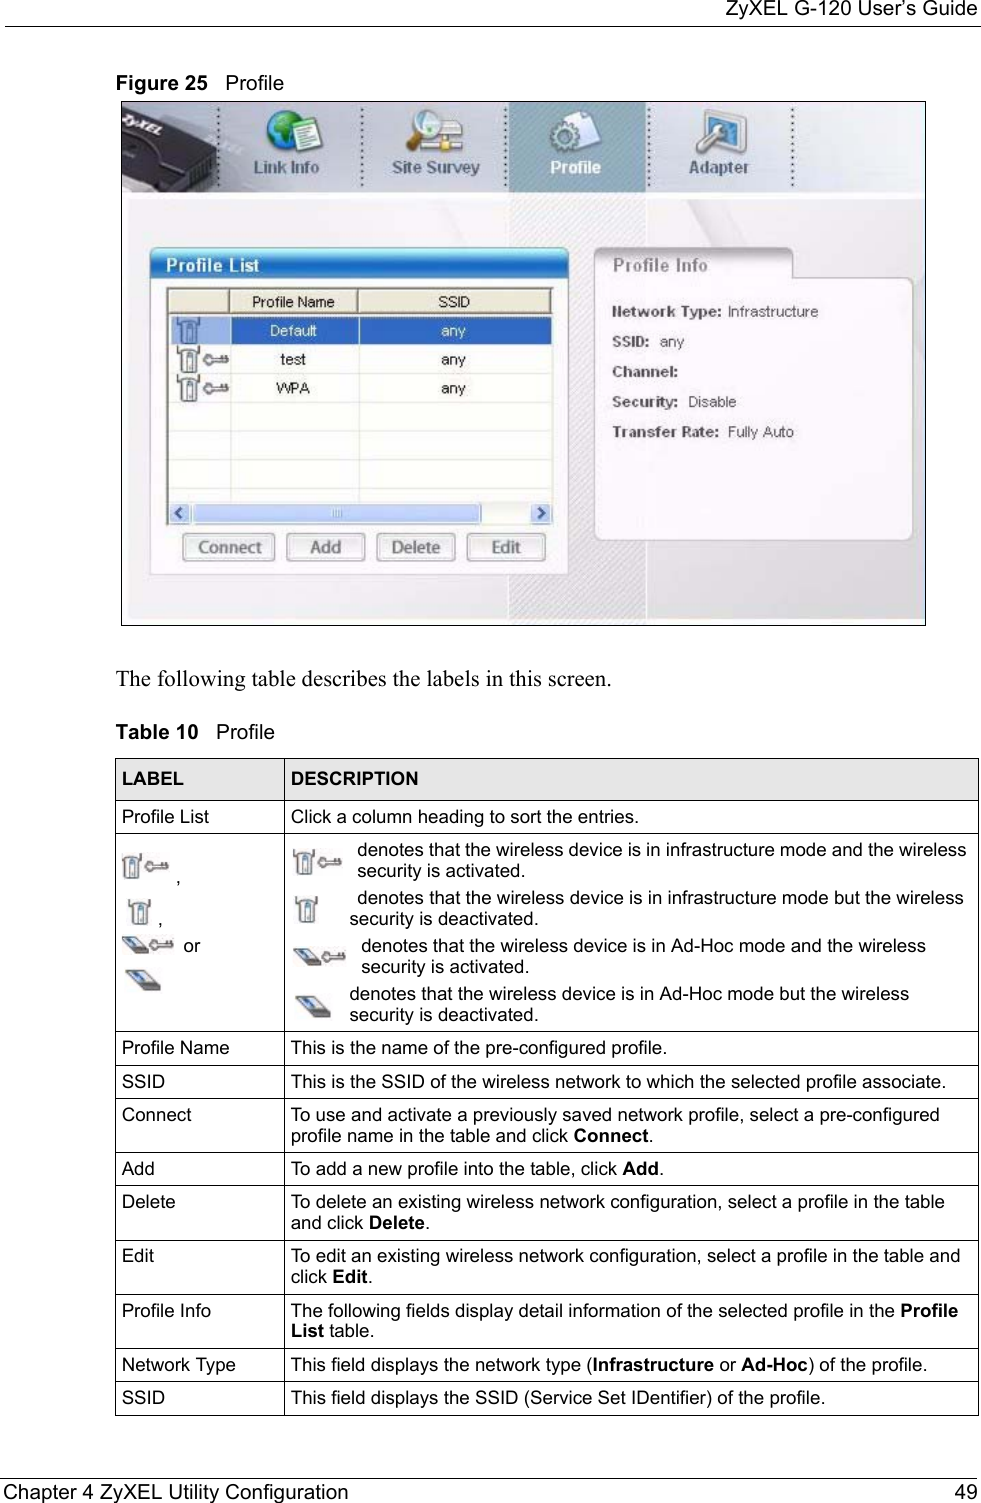 ZyXEL G-120 User’s GuideChapter 4 ZyXEL Utility Configuration 49Figure 25   Profile  The following table describes the labels in this screen. Table 10   Profile LABEL DESCRIPTIONProfile List Click a column heading to sort the entries.,, ordenotes that the wireless device is in infrastructure mode and the wireless security is activated.denotes that the wireless device is in infrastructure mode but the wireless security is deactivated.denotes that the wireless device is in Ad-Hoc mode and the wireless security is activated.denotes that the wireless device is in Ad-Hoc mode but the wireless security is deactivated.Profile Name This is the name of the pre-configured profile.SSID This is the SSID of the wireless network to which the selected profile associate.Connect  To use and activate a previously saved network profile, select a pre-configured profile name in the table and click Connect.Add  To add a new profile into the table, click Add.Delete To delete an existing wireless network configuration, select a profile in the table and click Delete.Edit To edit an existing wireless network configuration, select a profile in the table and click Edit.Profile Info The following fields display detail information of the selected profile in the Profile List table.Network Type This field displays the network type (Infrastructure or Ad-Hoc) of the profile.SSID This field displays the SSID (Service Set IDentifier) of the profile.